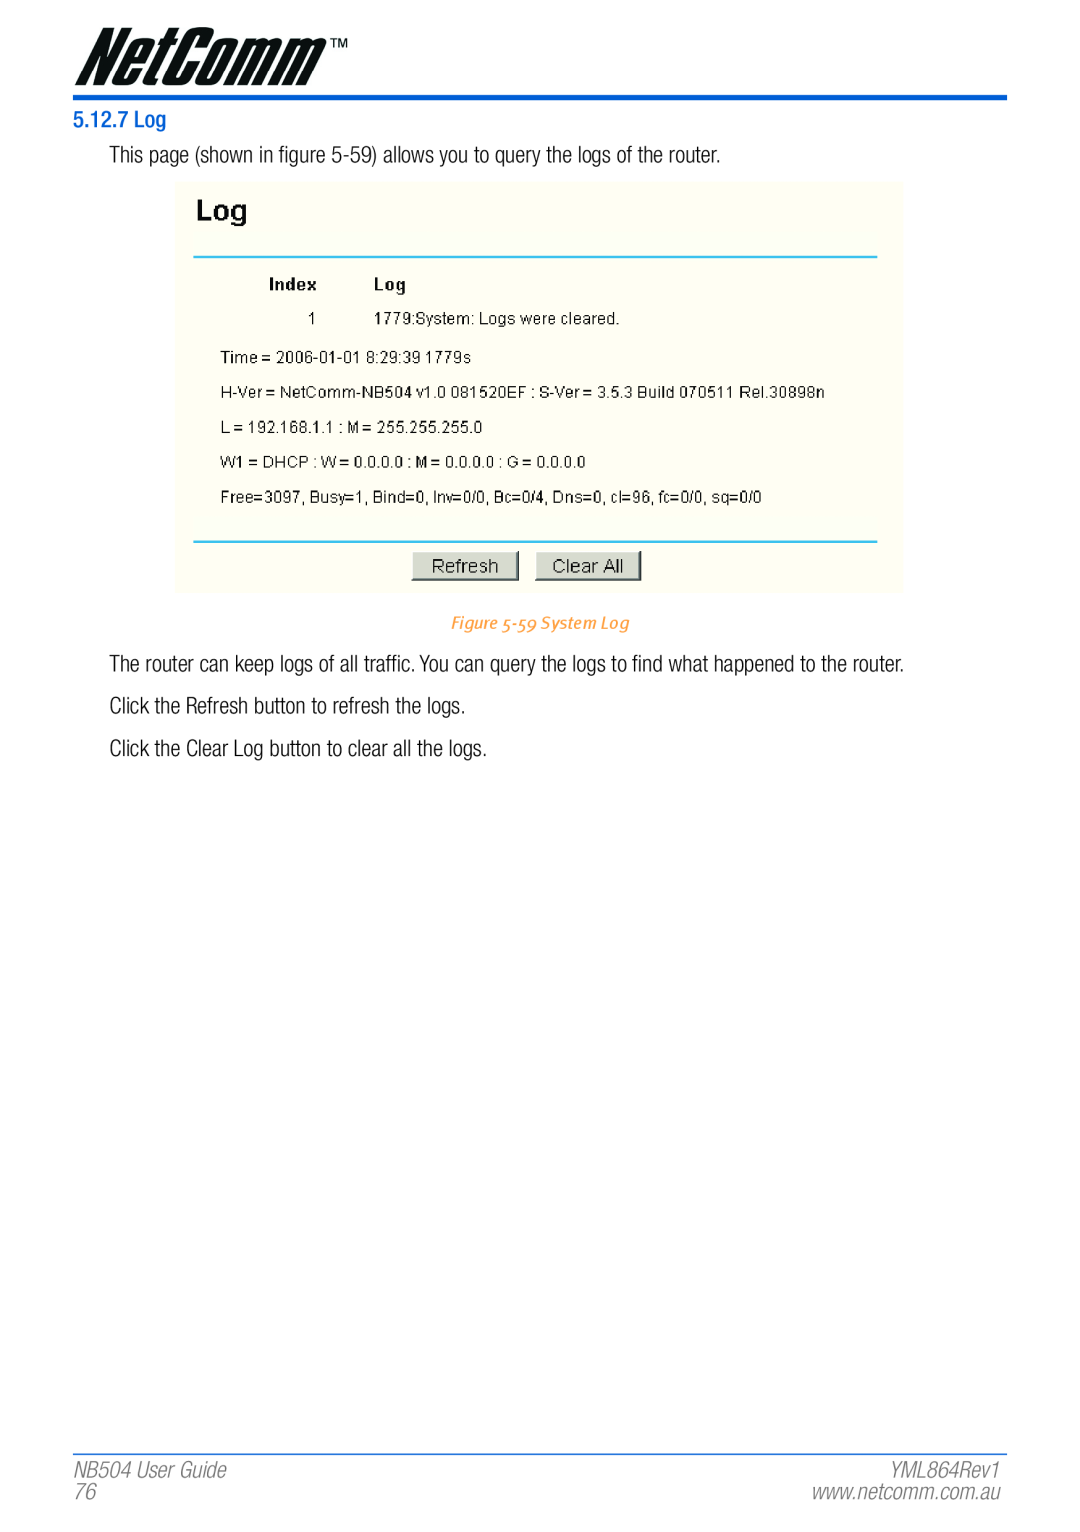 NetComm manual 5.12.7 Log, Click the Clear Log button to clear all the logs, NB504 User Guide 